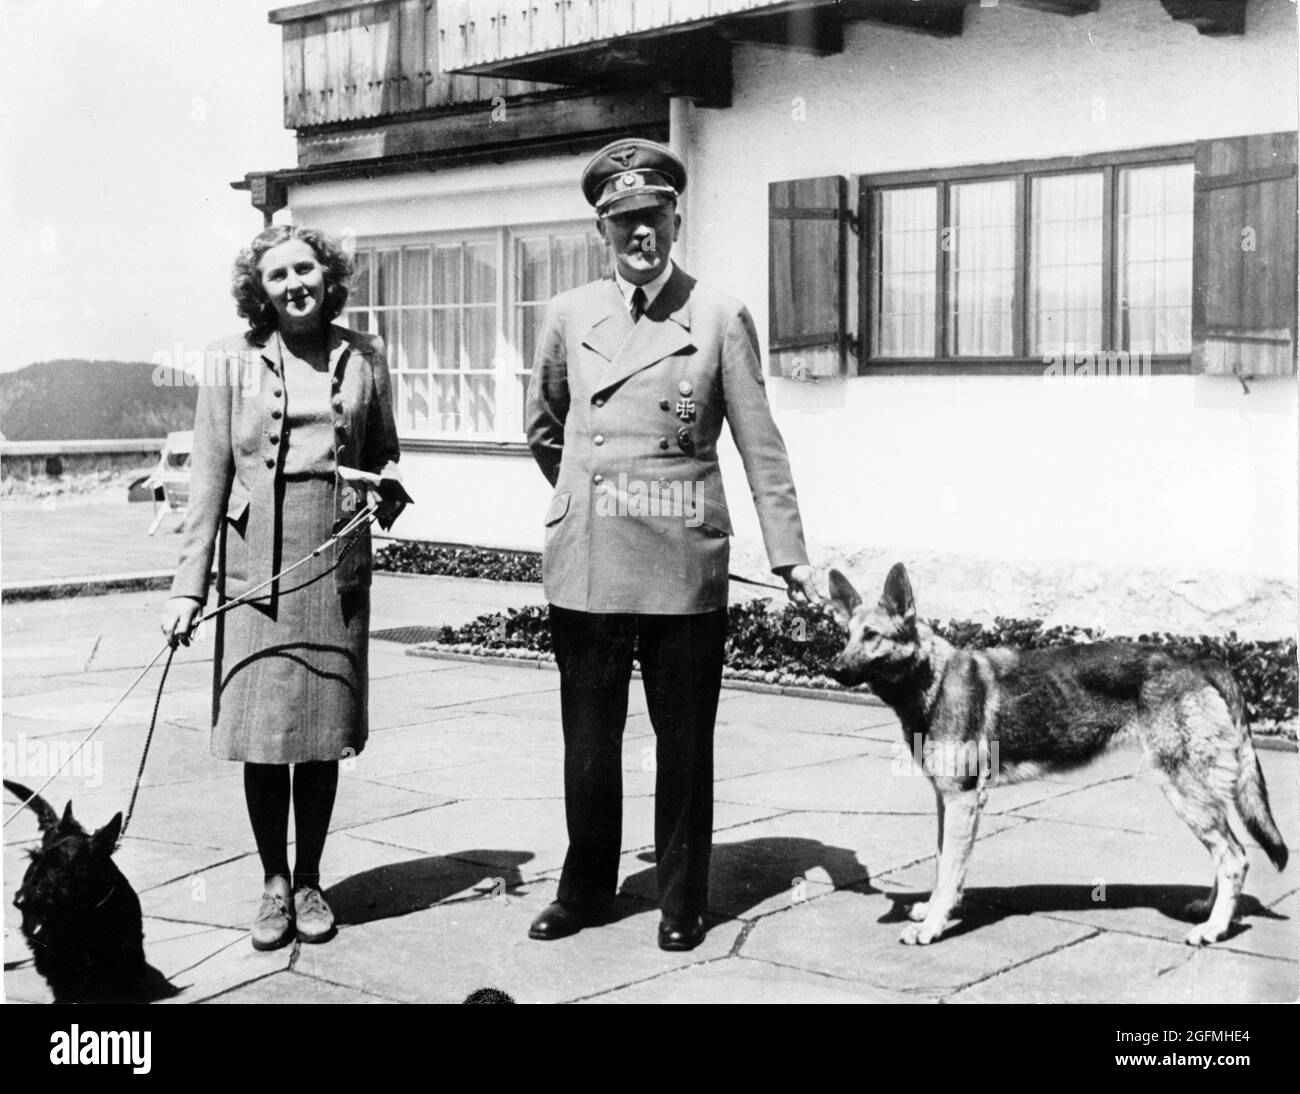 Adolf Hitler with his then girlfriend/mistress (later wife) Eva Braun with their dogs at the Berghof Alpine house. Credit: German Bundesarchiv Stock Photo